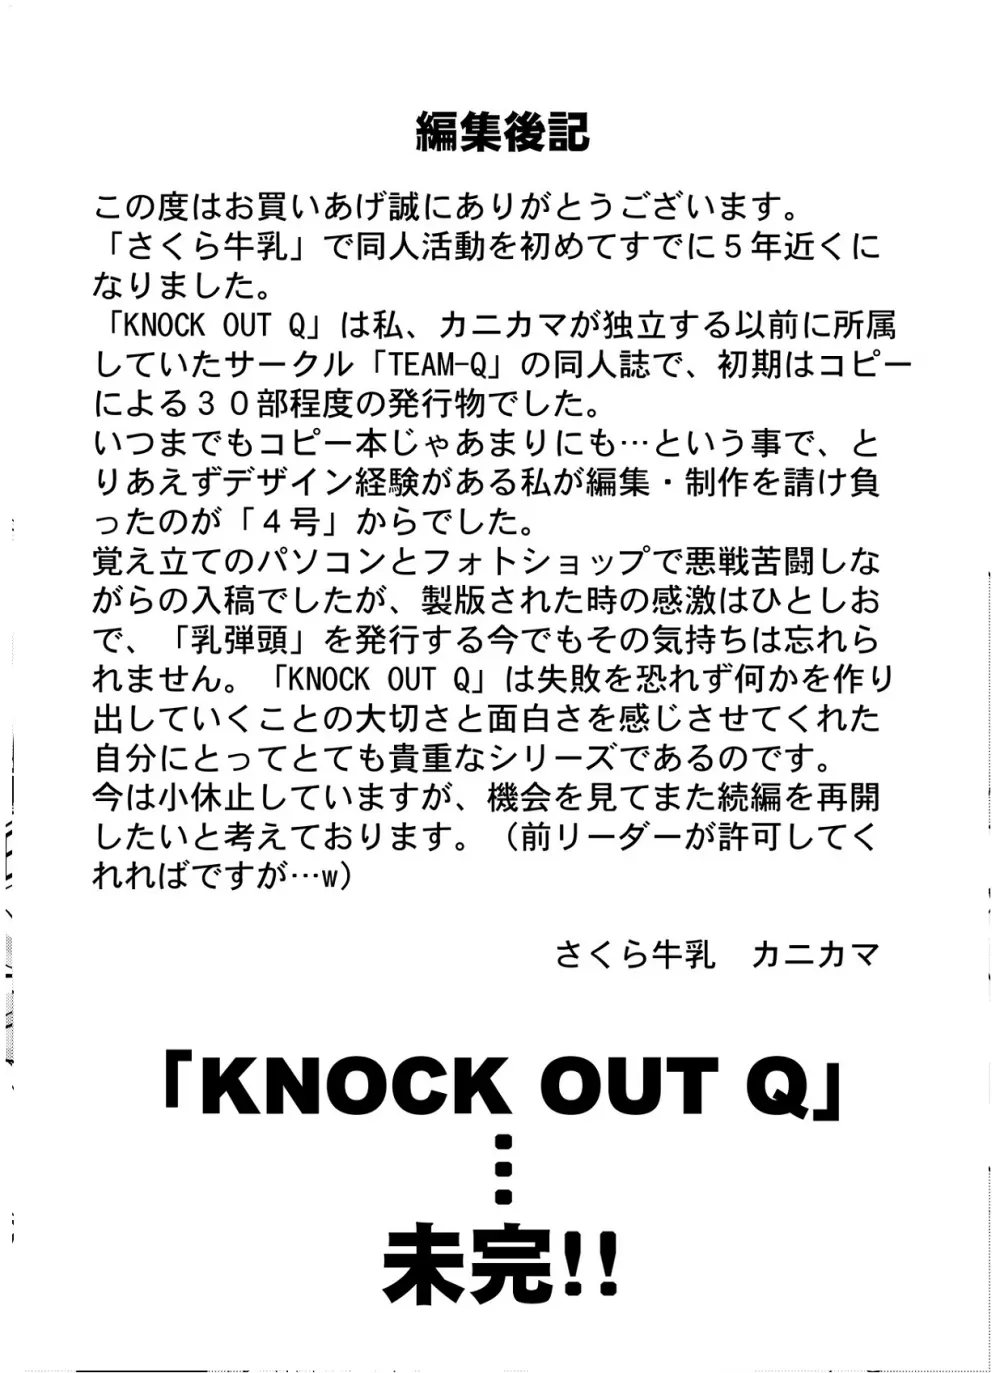 Knockout-Q 14ページ